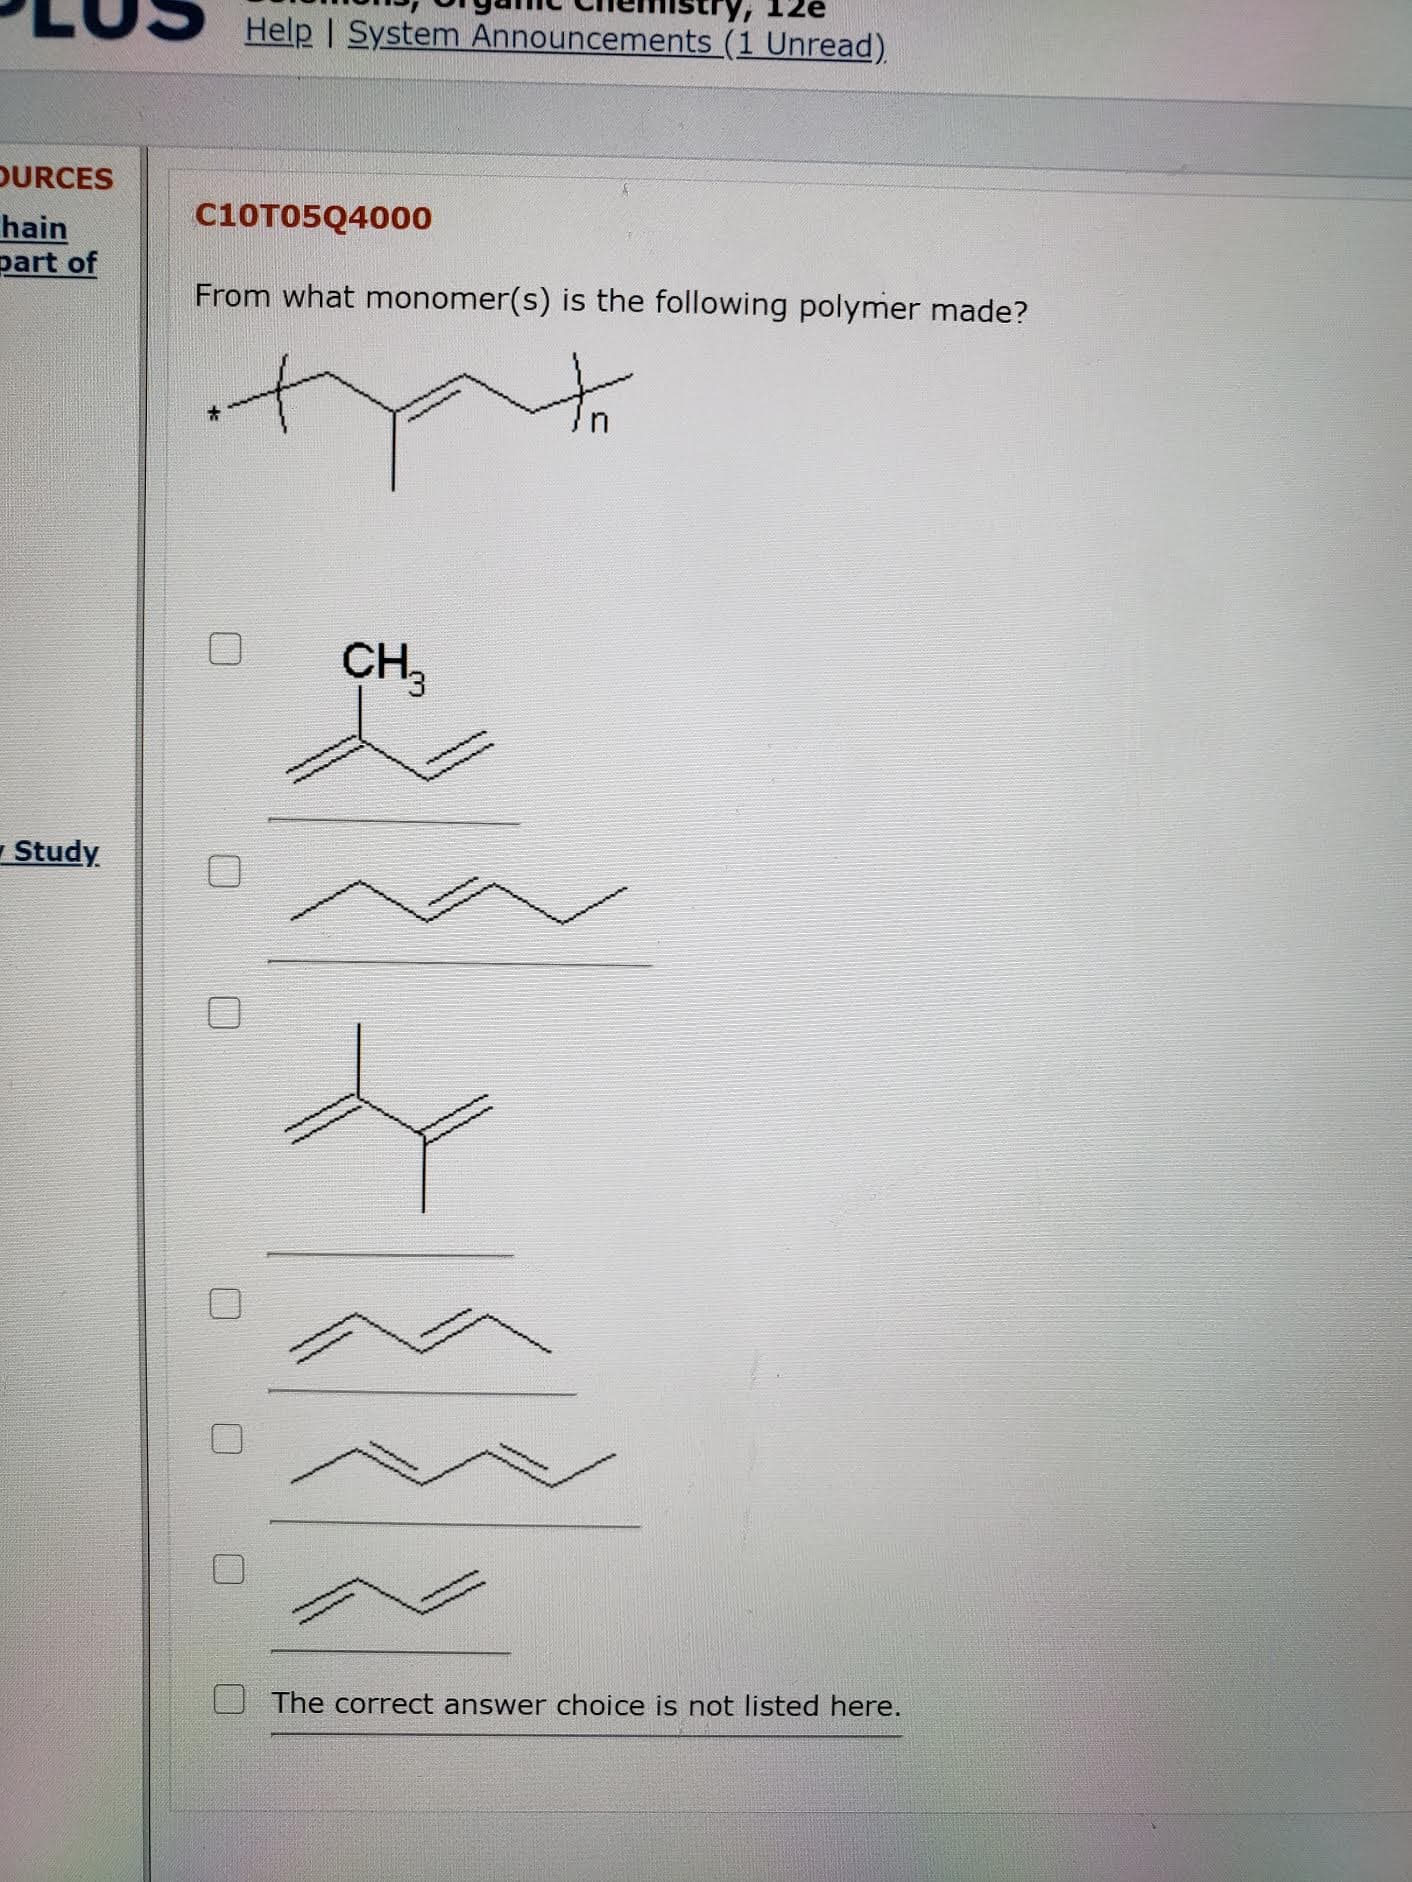 C10T05Q4000
From what monomer(s) is the following polymer made?
CH,
The correct answer choice is not listed here.
